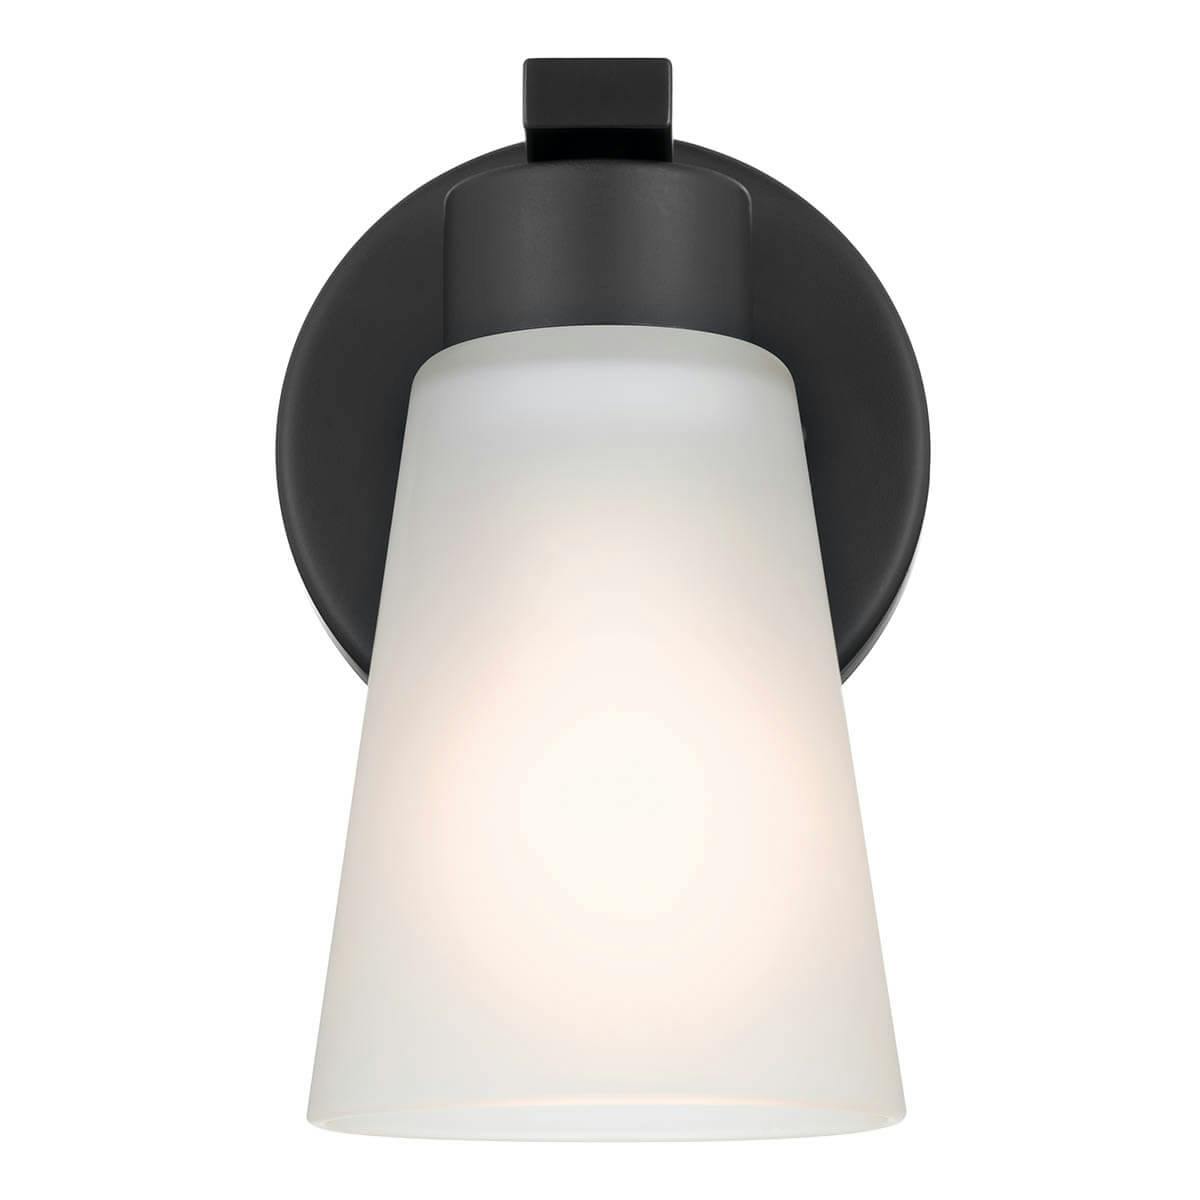 Front view of the Stamos 4.25" 1 Light Wall Sconce Black on a white background